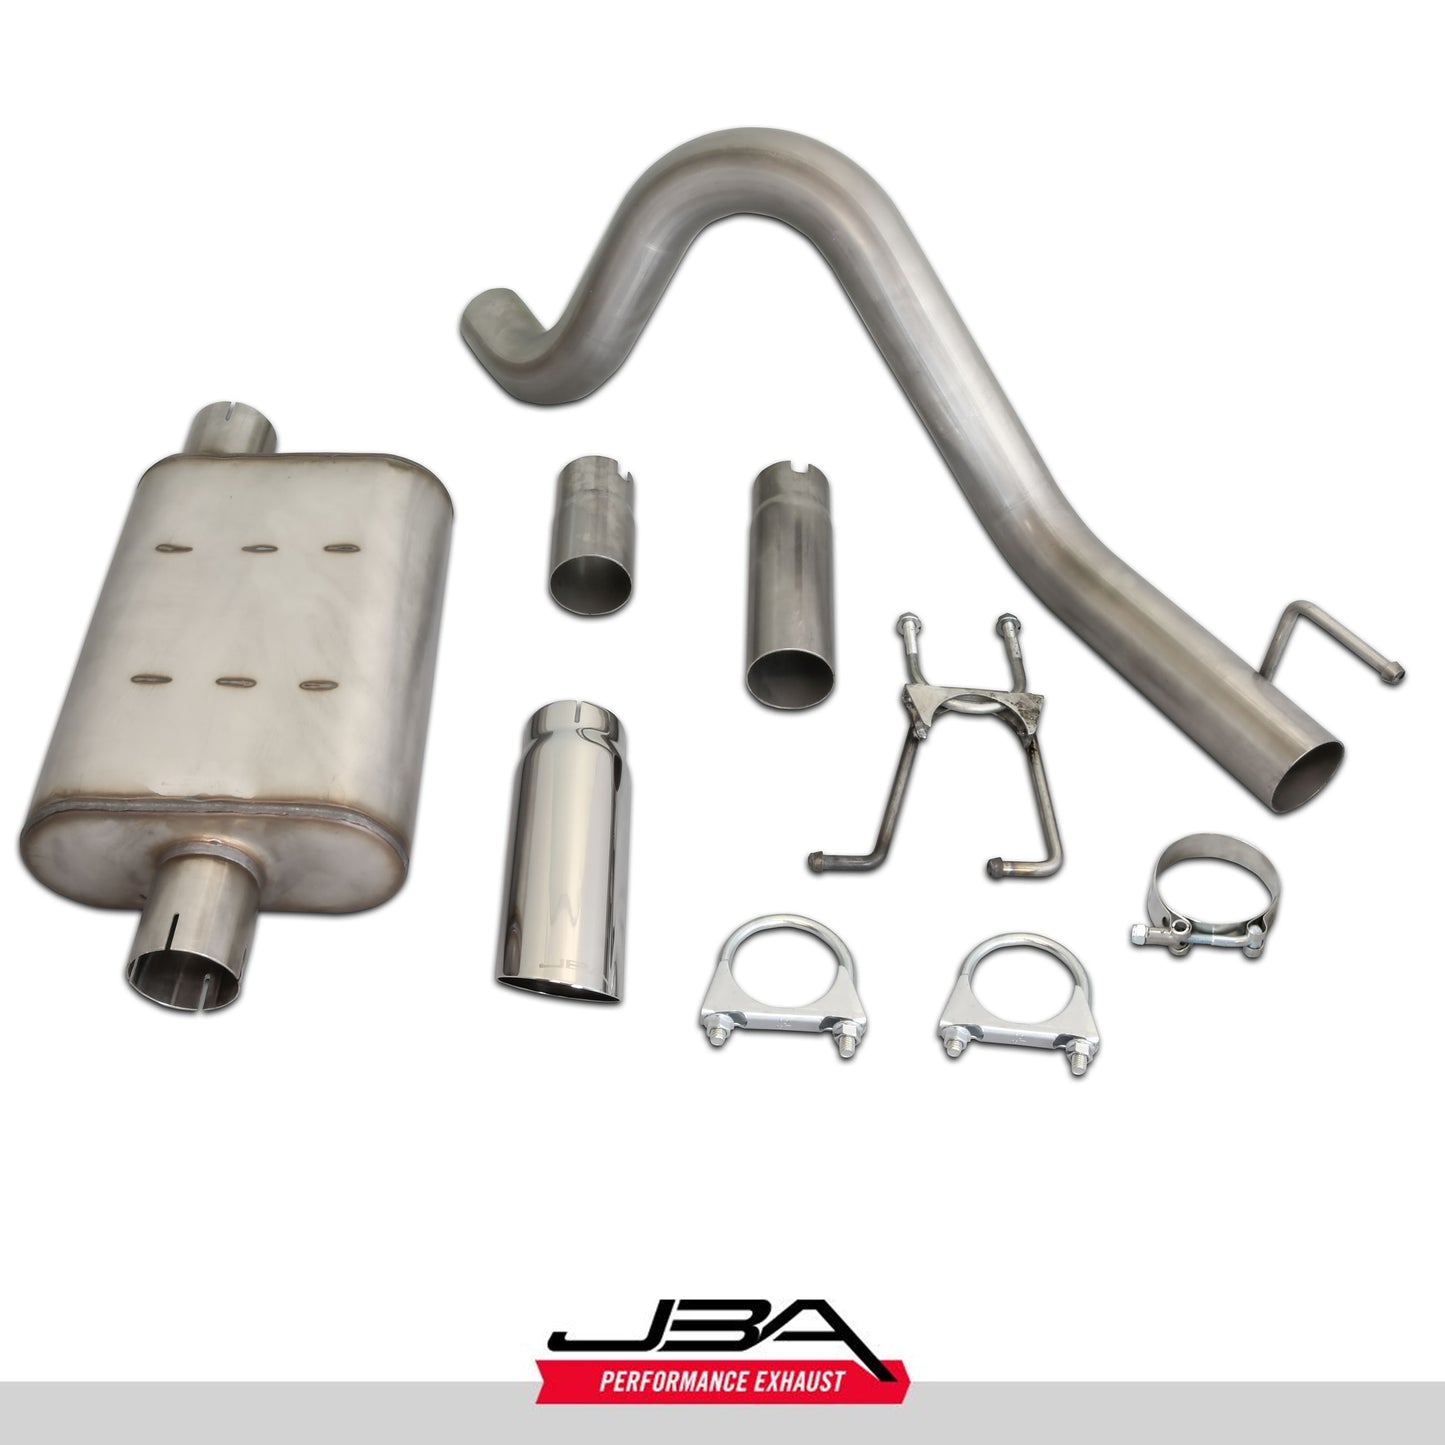 JBA Performance Exhaust 30-1502 2.5" Stainless Steel Exhaust System 87-96 Jeep Wrangler YJ